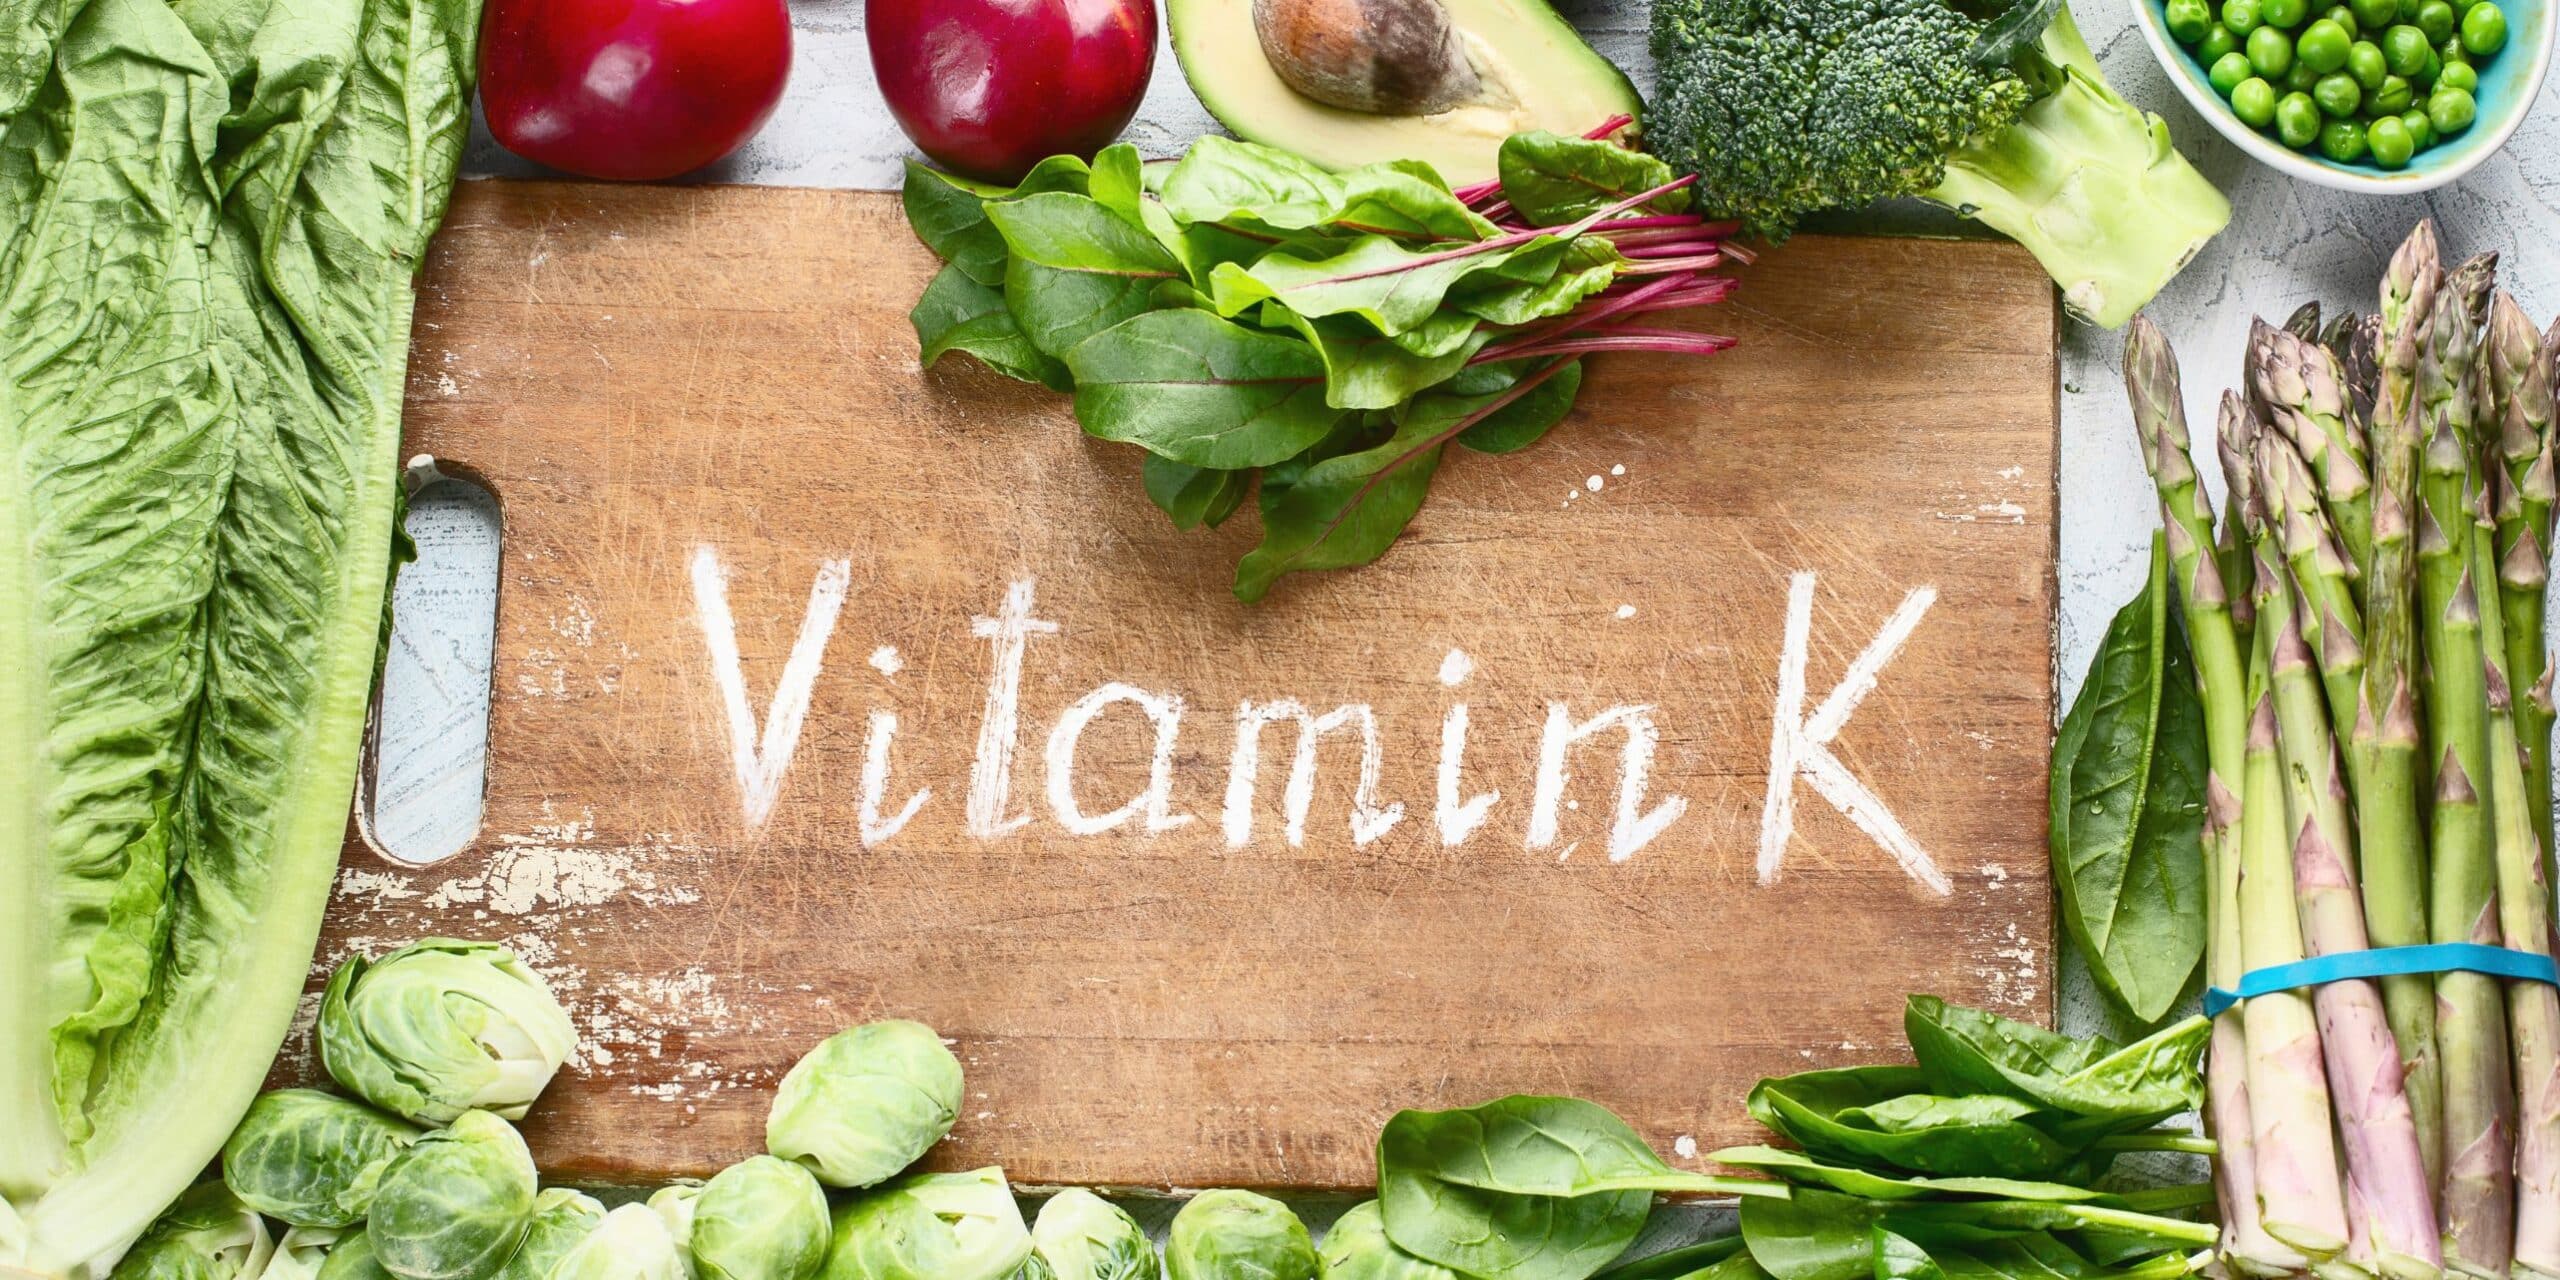 the words vitamin K surrounded by foods that contain vitamin K